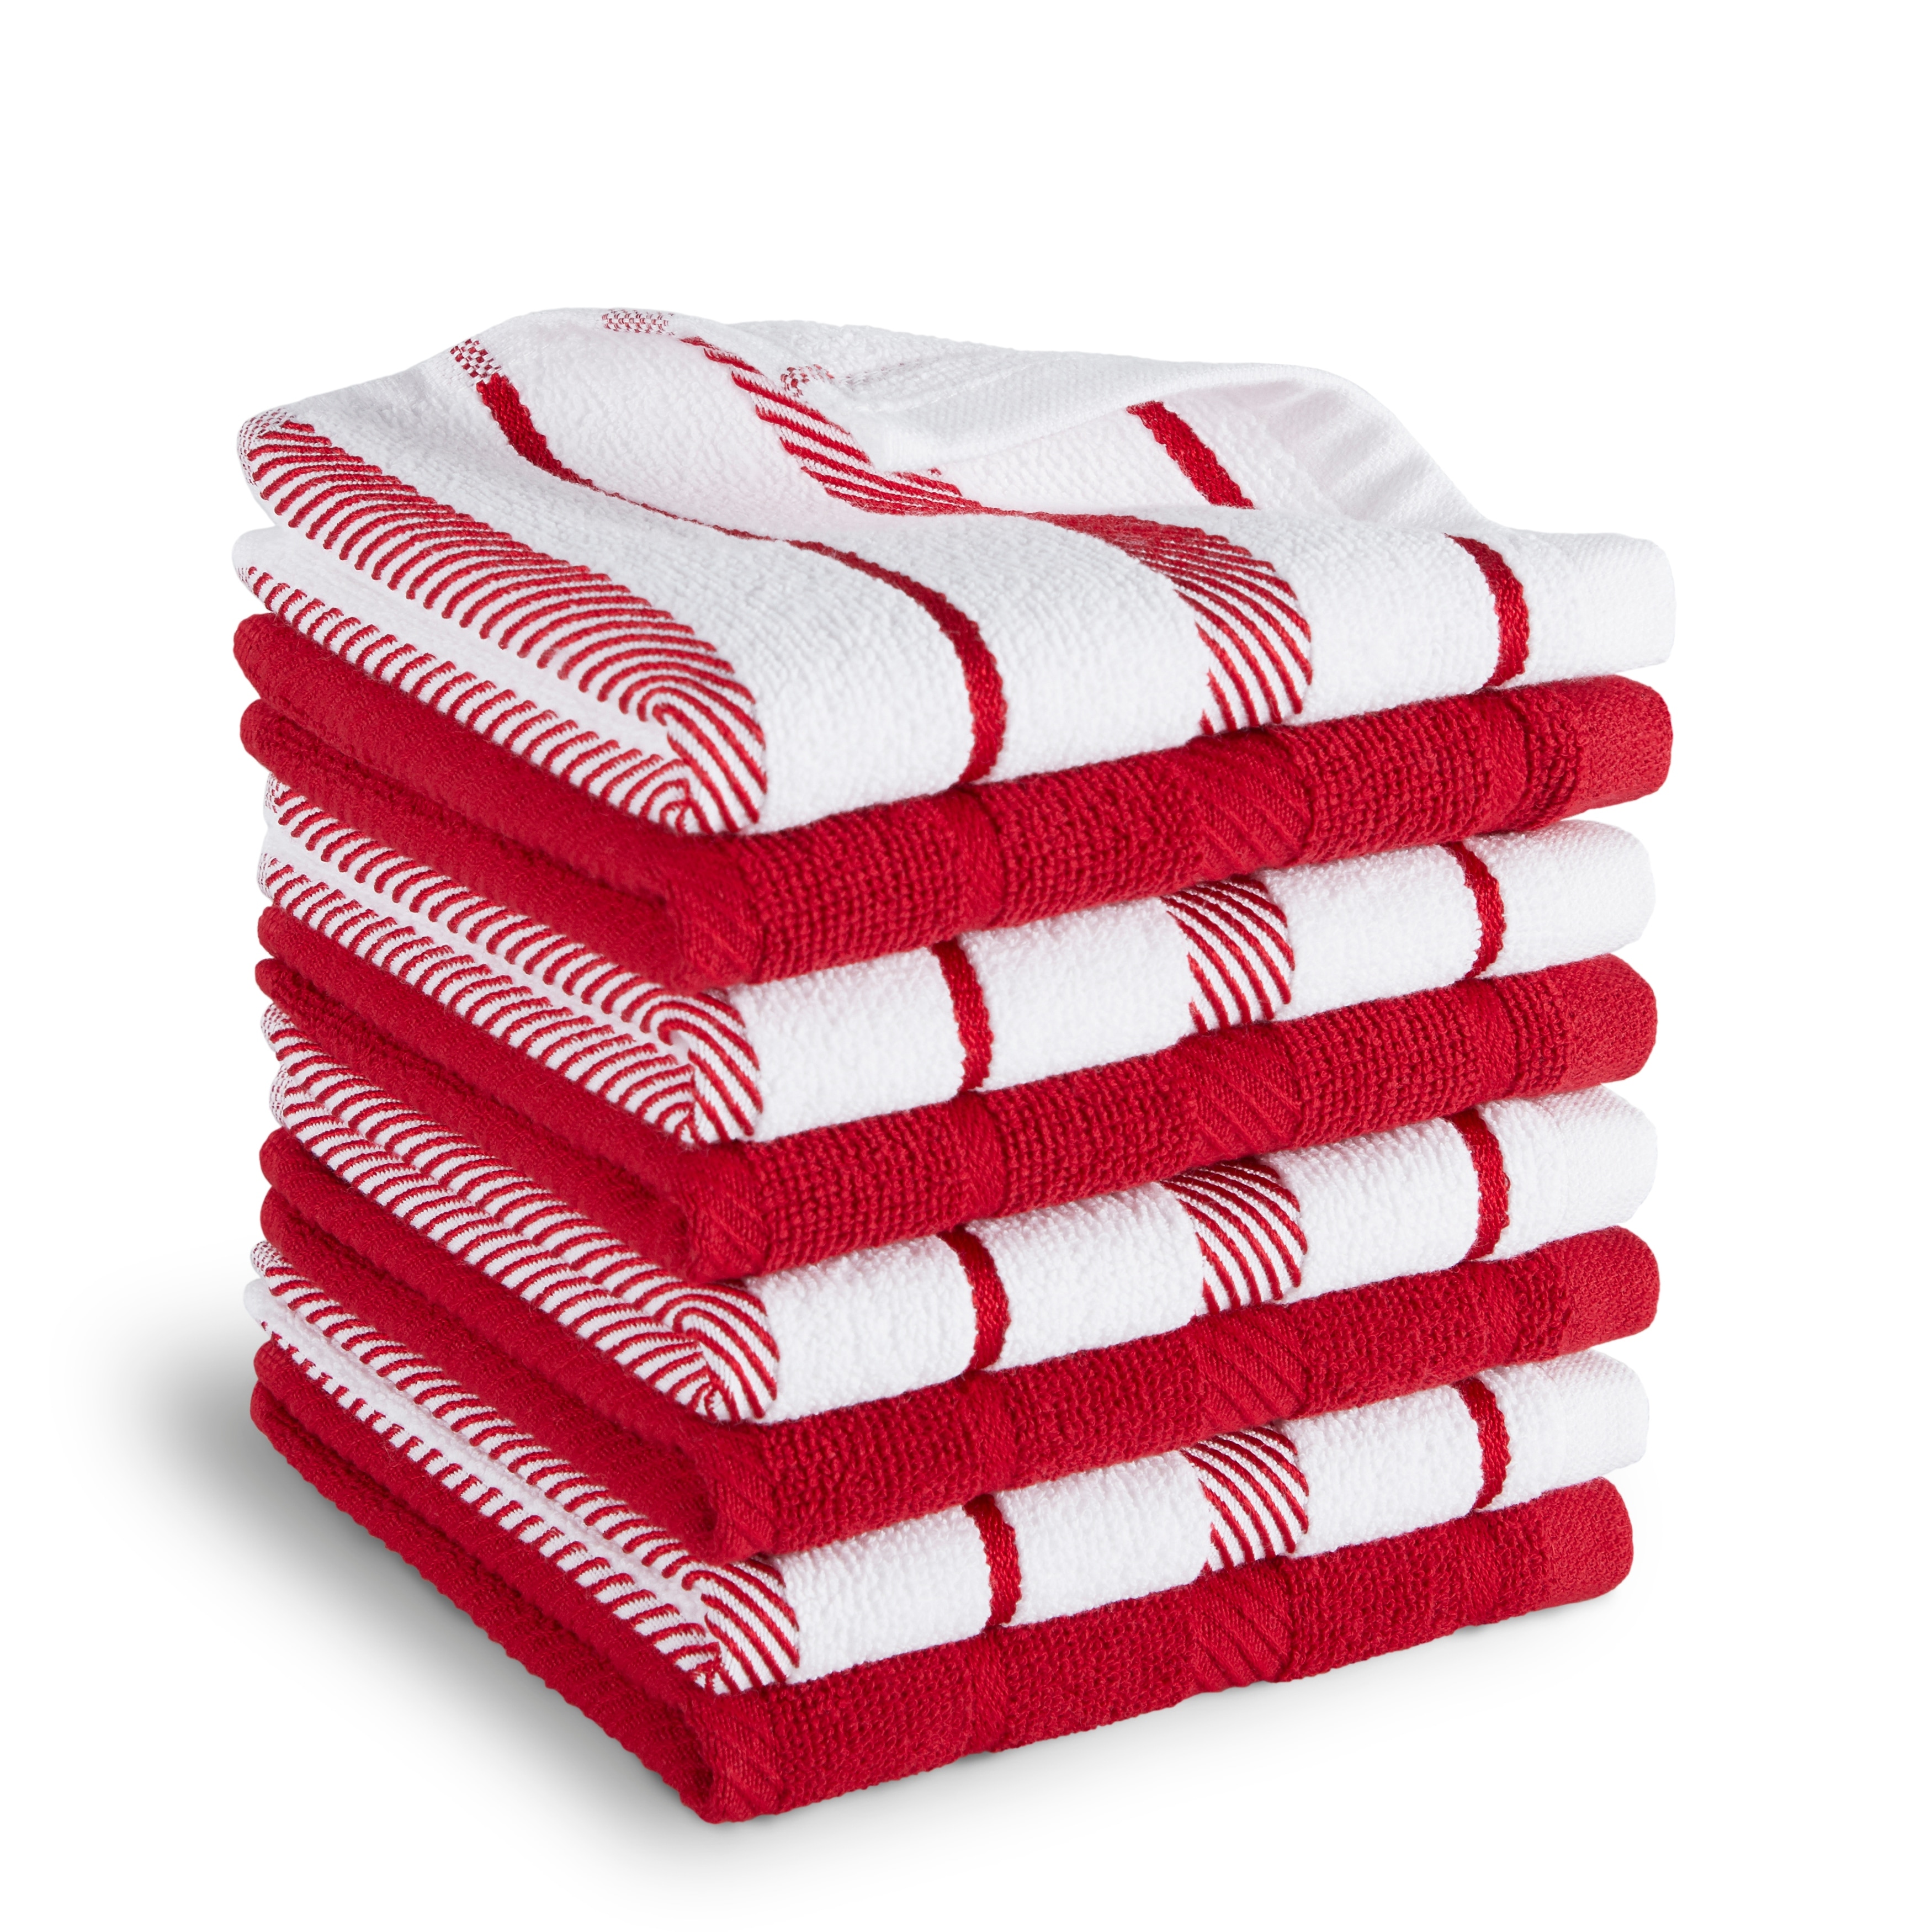 T-Fal Textiles 6 Pack Solid & Check Parquet Kitchen Dish Towel Cloth Set - Red